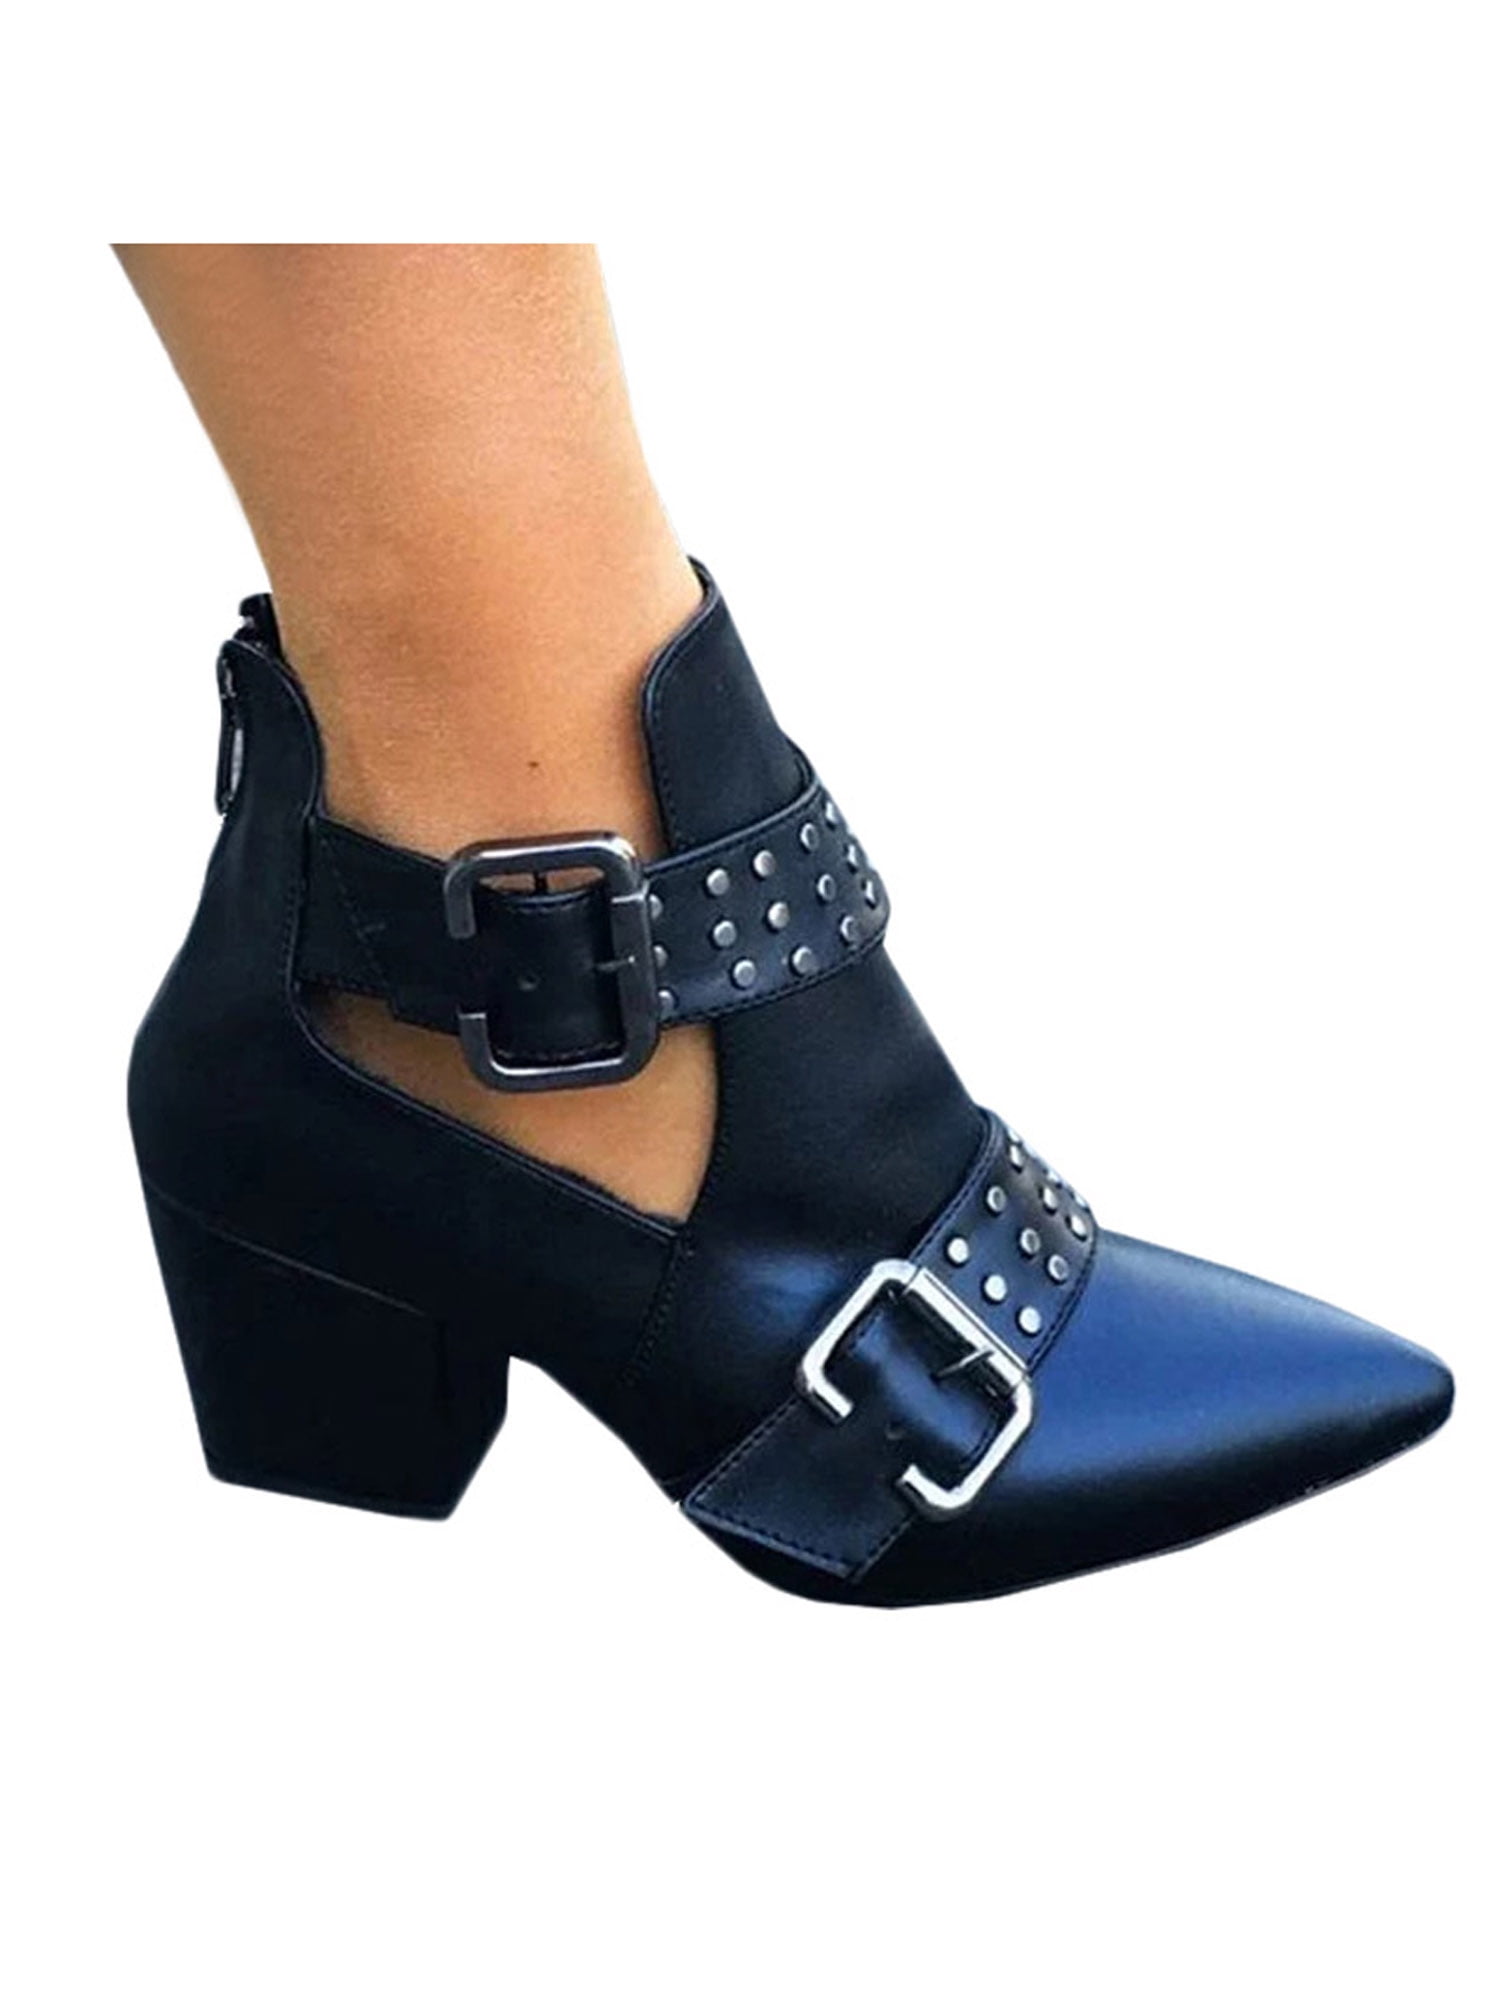 Details about   Women Low Heels Ankle Boots Buckle Belt Rivet Githic Riding Shoes Casual Outdoor 